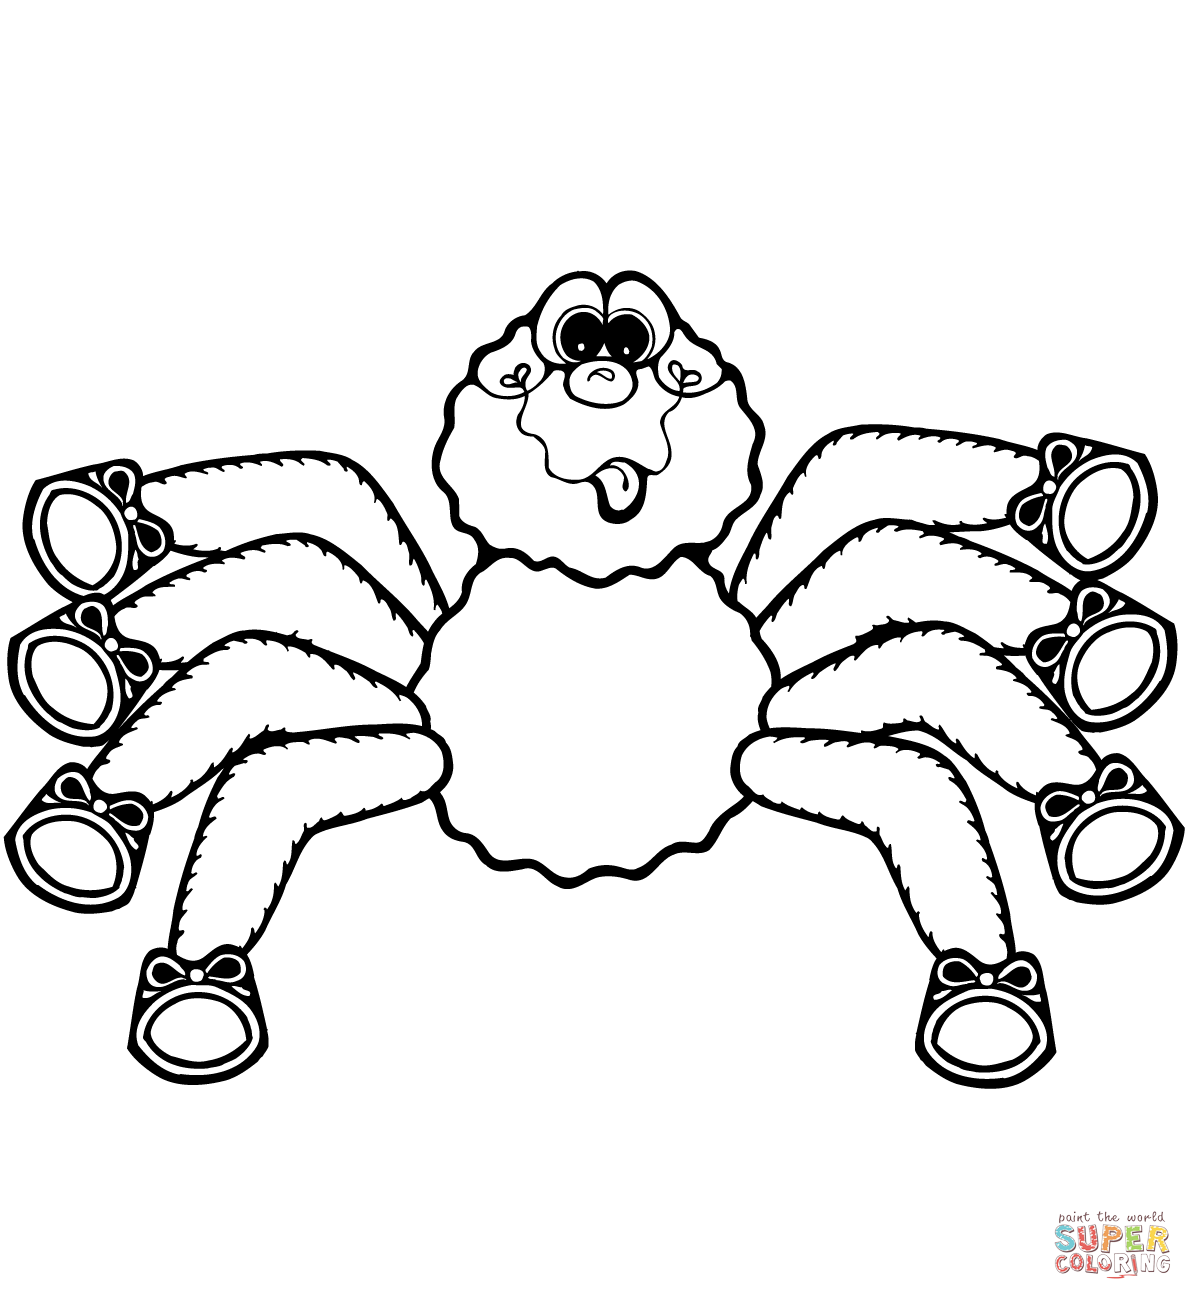 Cartoon Spiders Images Free download on ClipArtMag